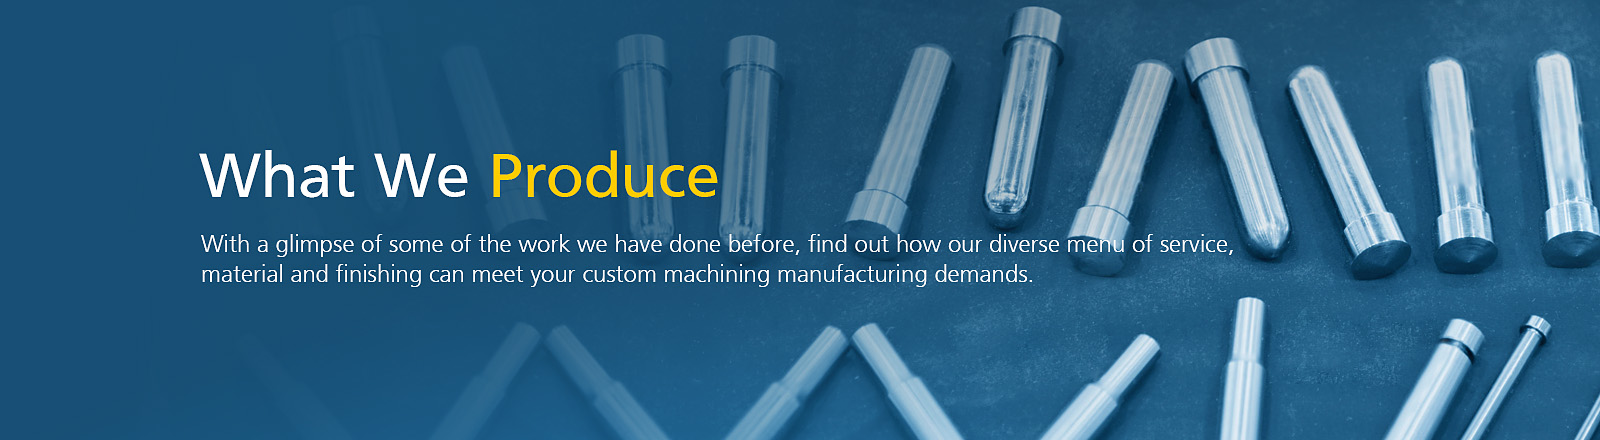 IBEE Products - Custom CNC milling, turning, lathing, grinding and wire cutting